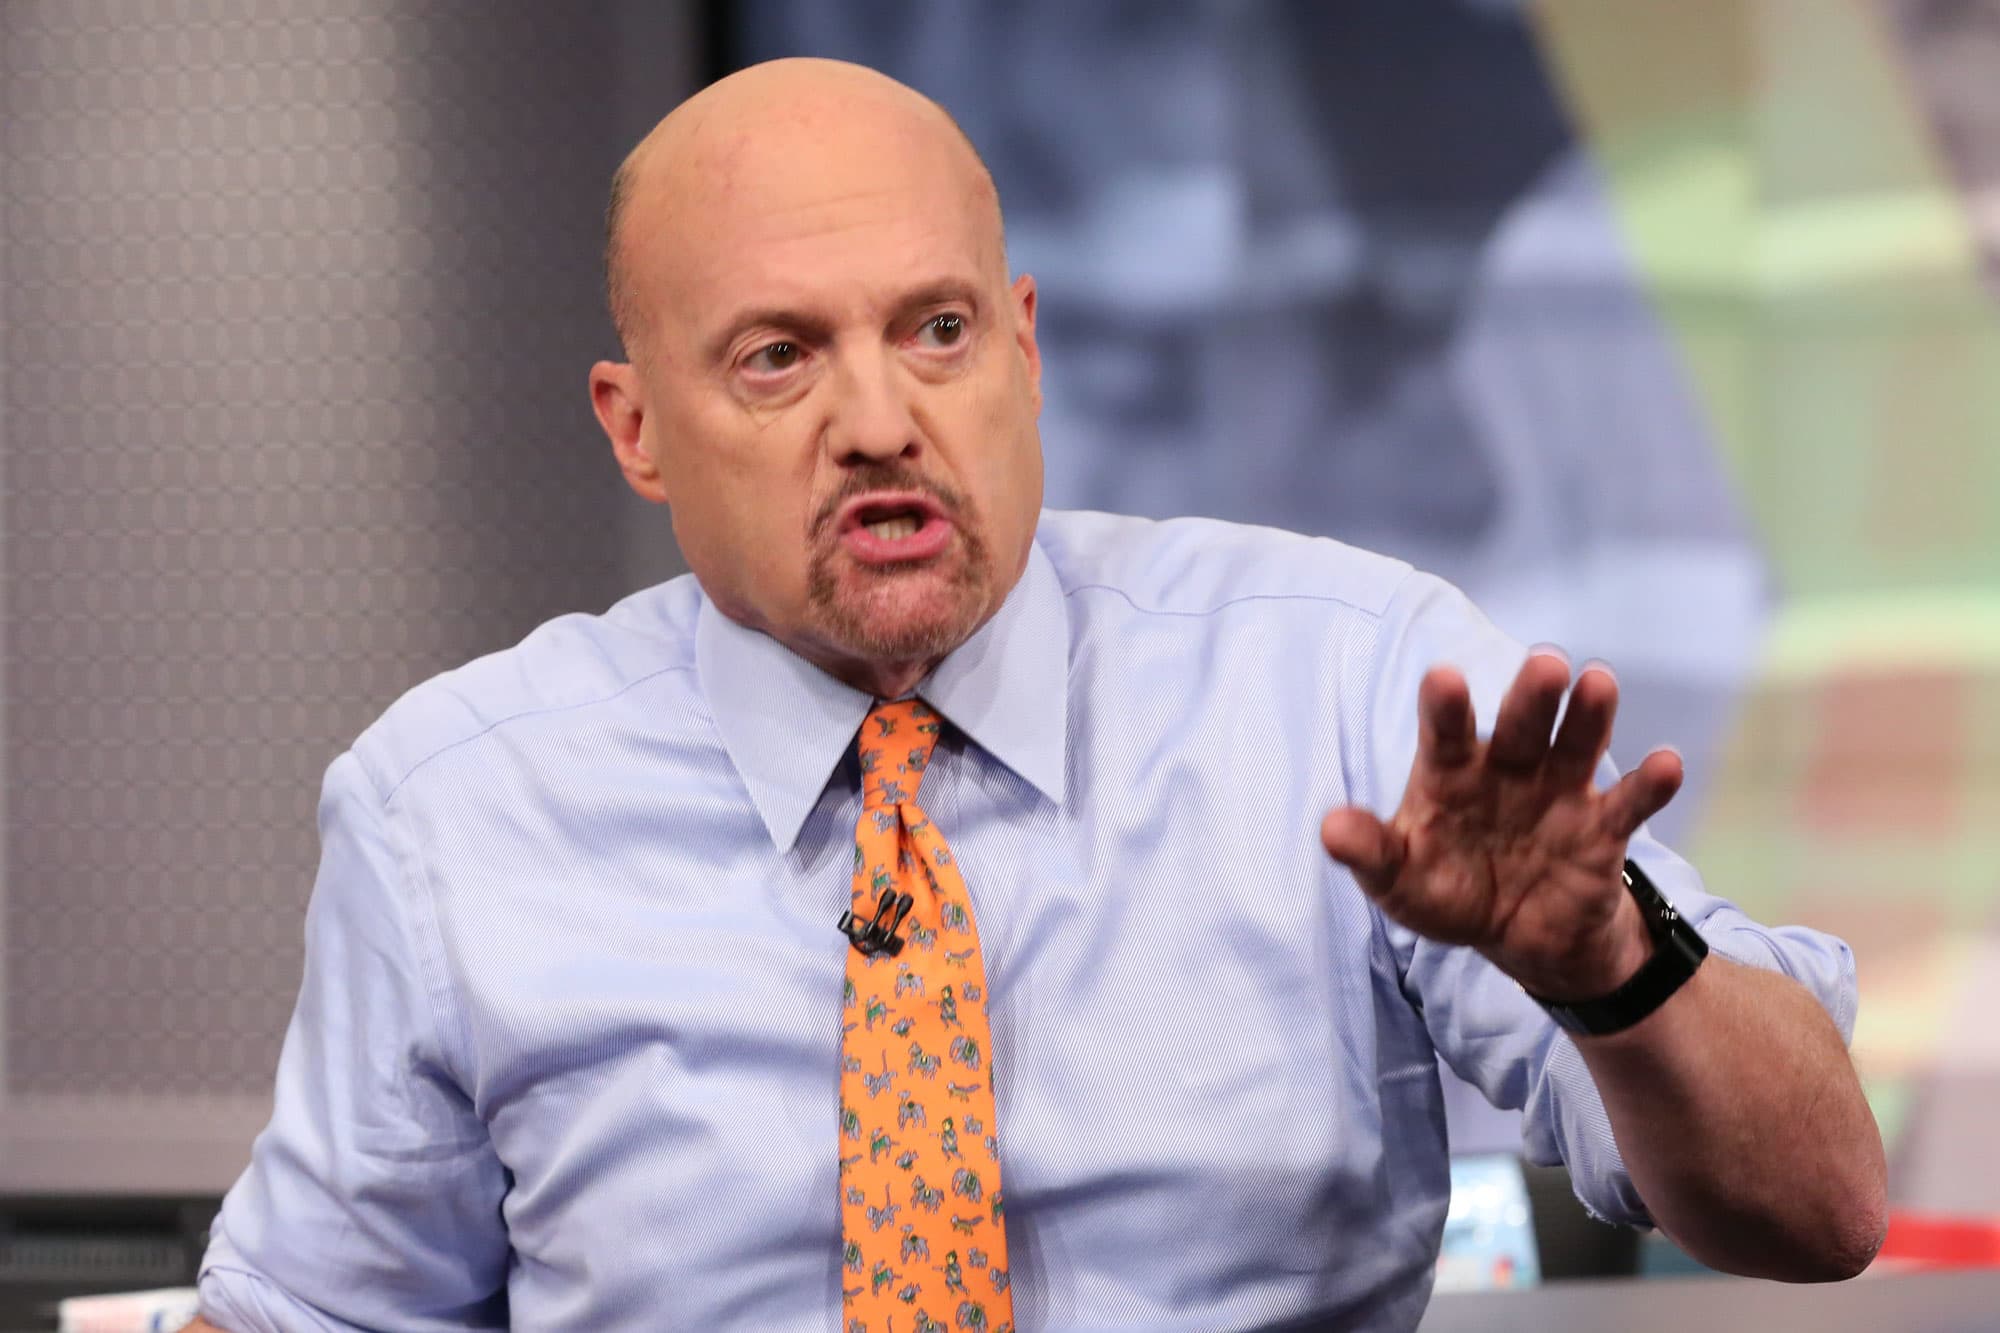 Jim Cramer says Russia’s invasion of Ukraine could put more pressure on Fed to raise interest rates